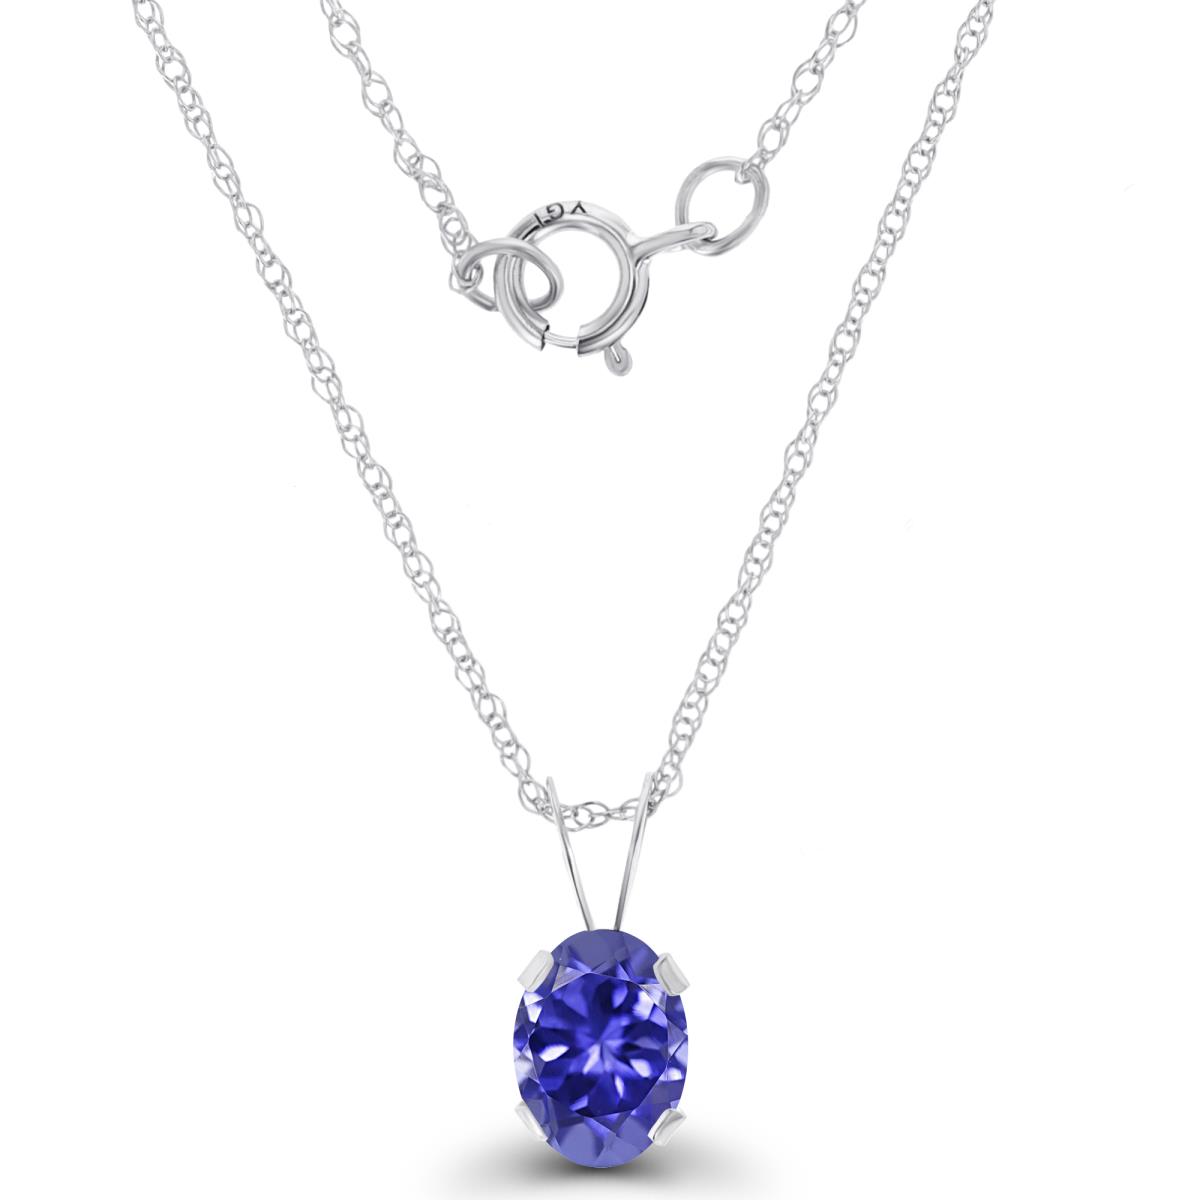 14K White Gold 7x5mm Oval Tanzanite 18" Rope Chain Necklace